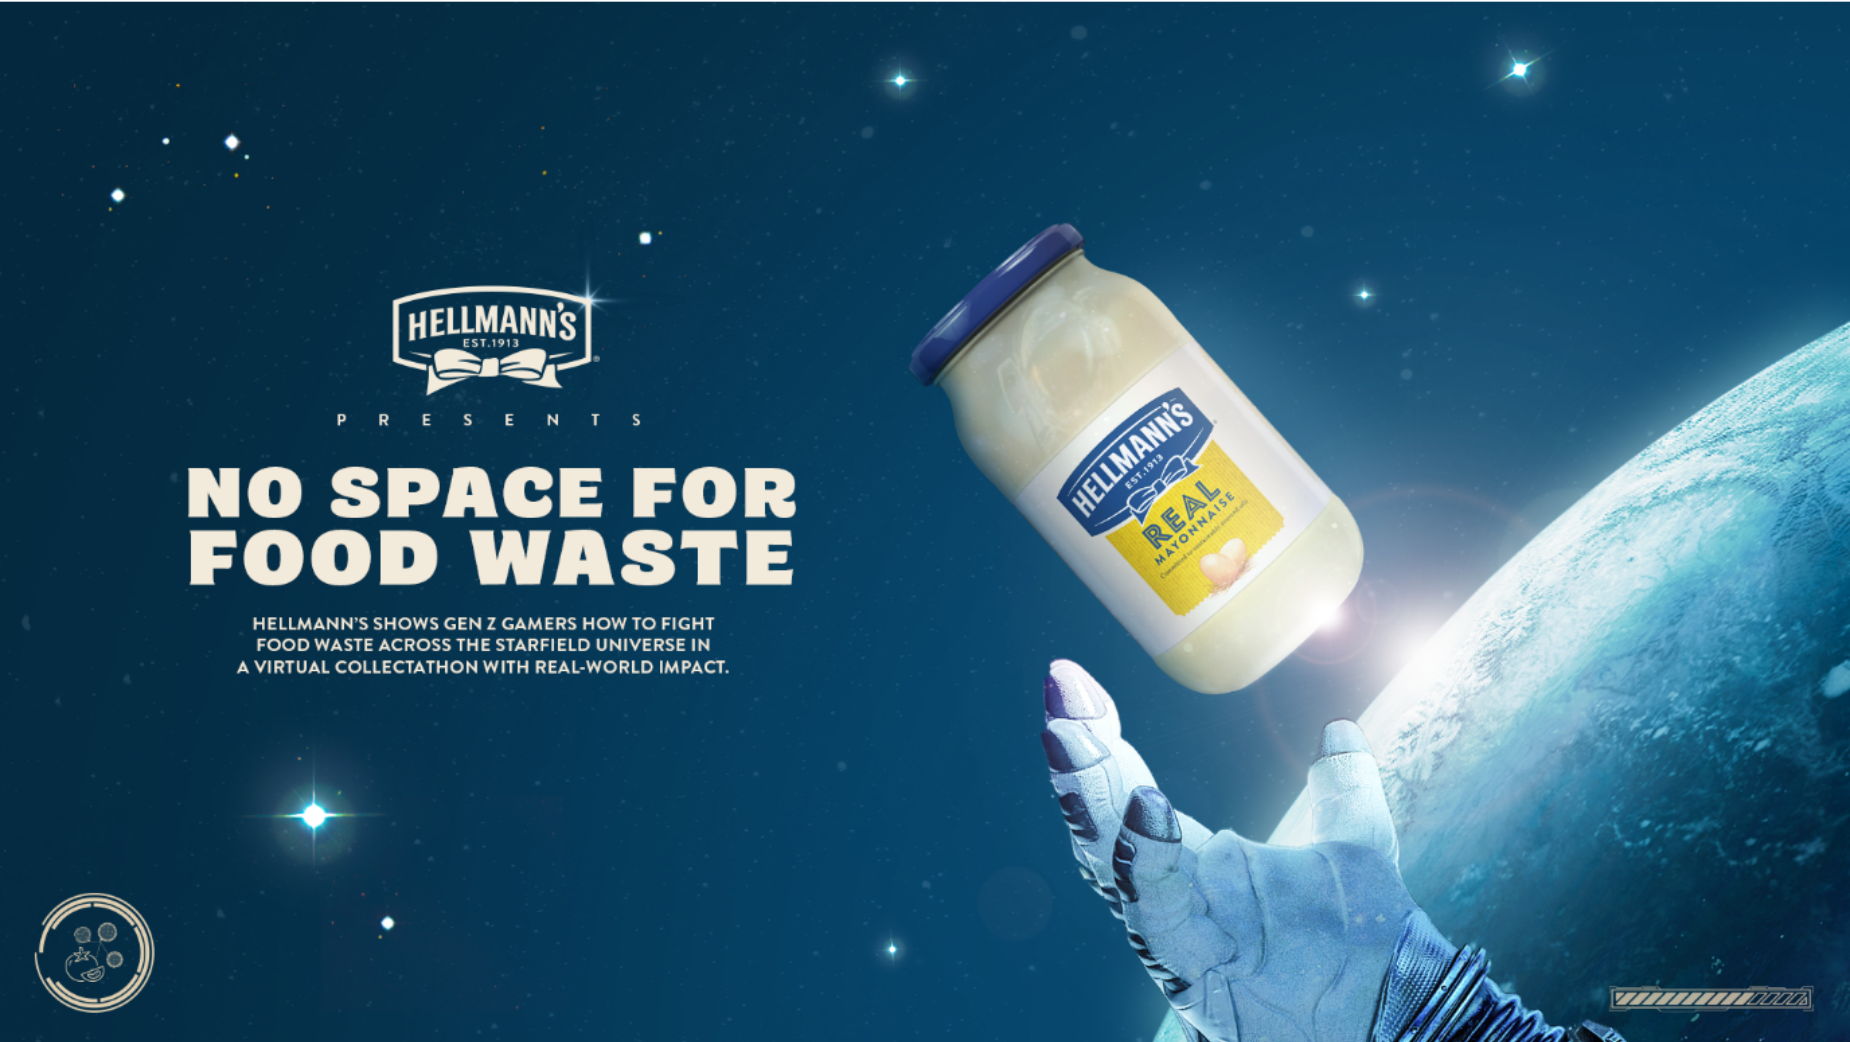 Hellmann's Launches Innovative Campaign to Clear the Galaxy of Food Waste